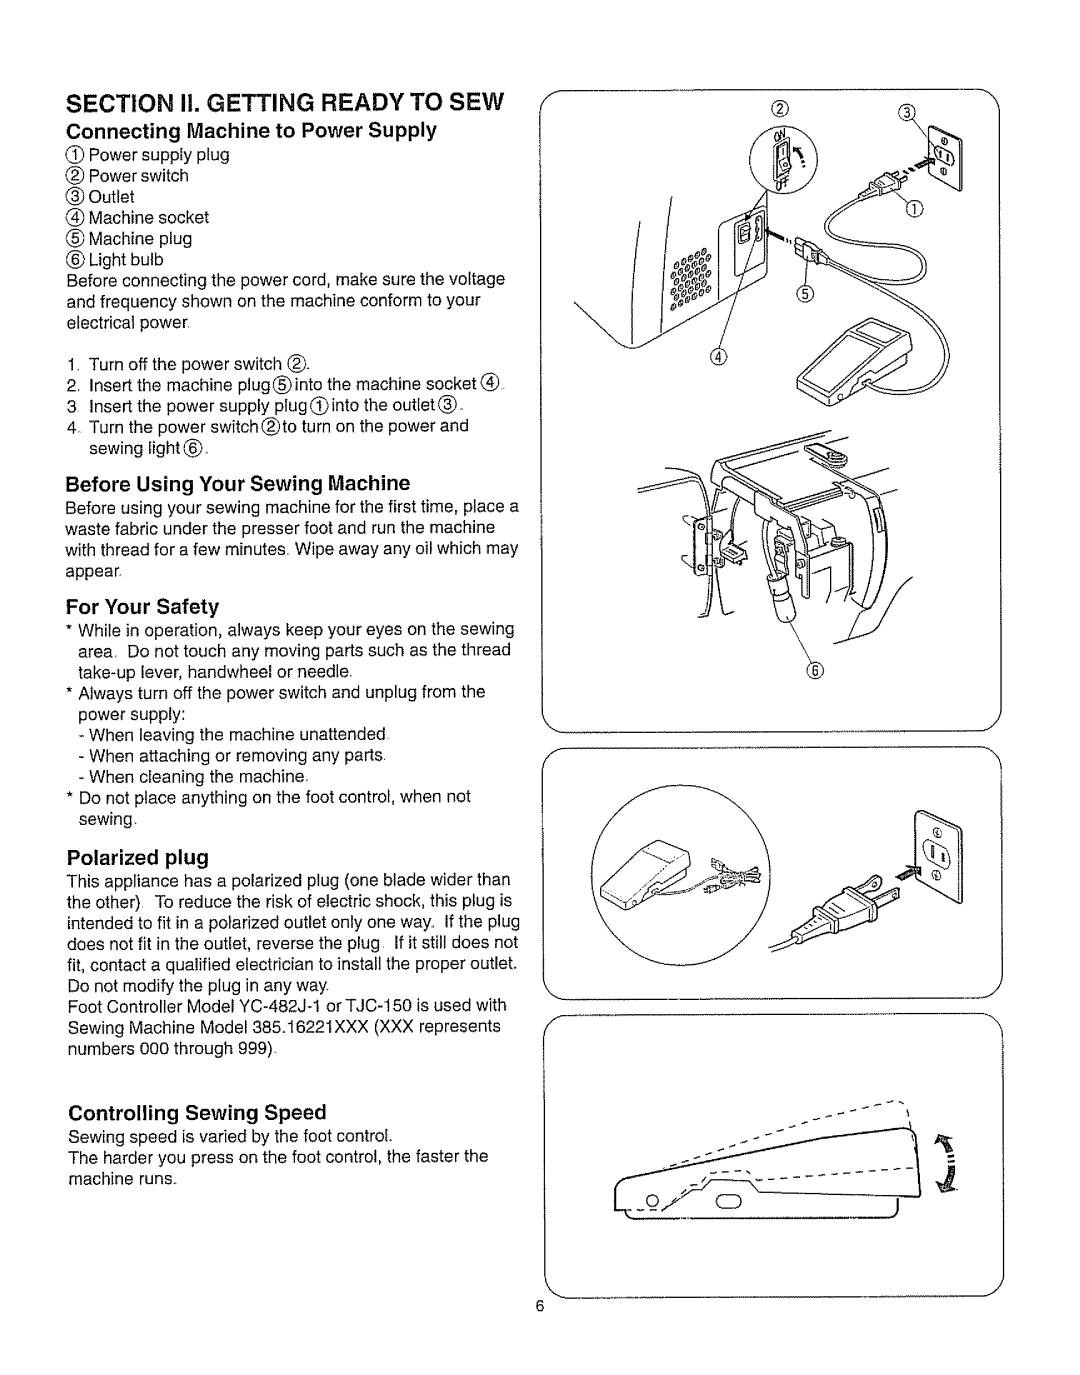 Kenmore 385.162213 Section Ii. Getting Ready To Sew, Connecting Machine to Power Supply, Before Using Your Sewing Machine 